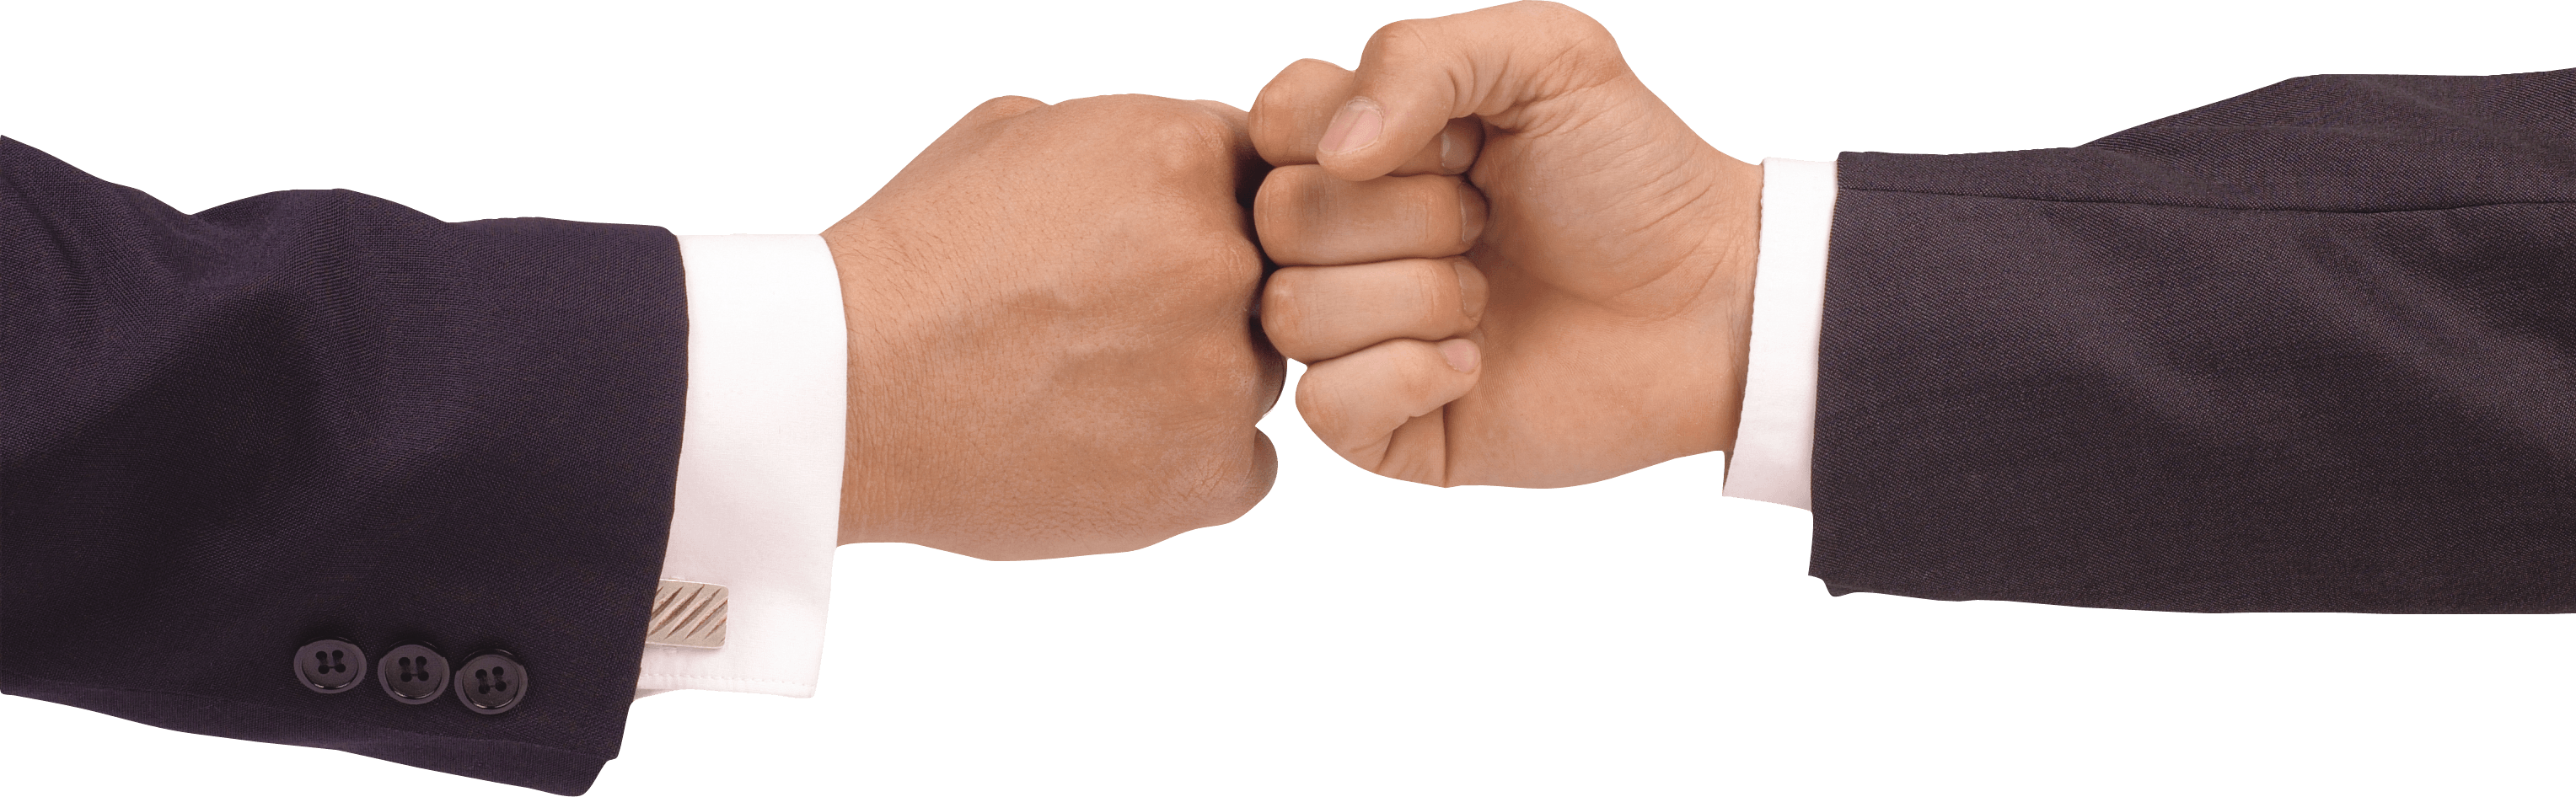 Hands Png Hand Image  PNG Image